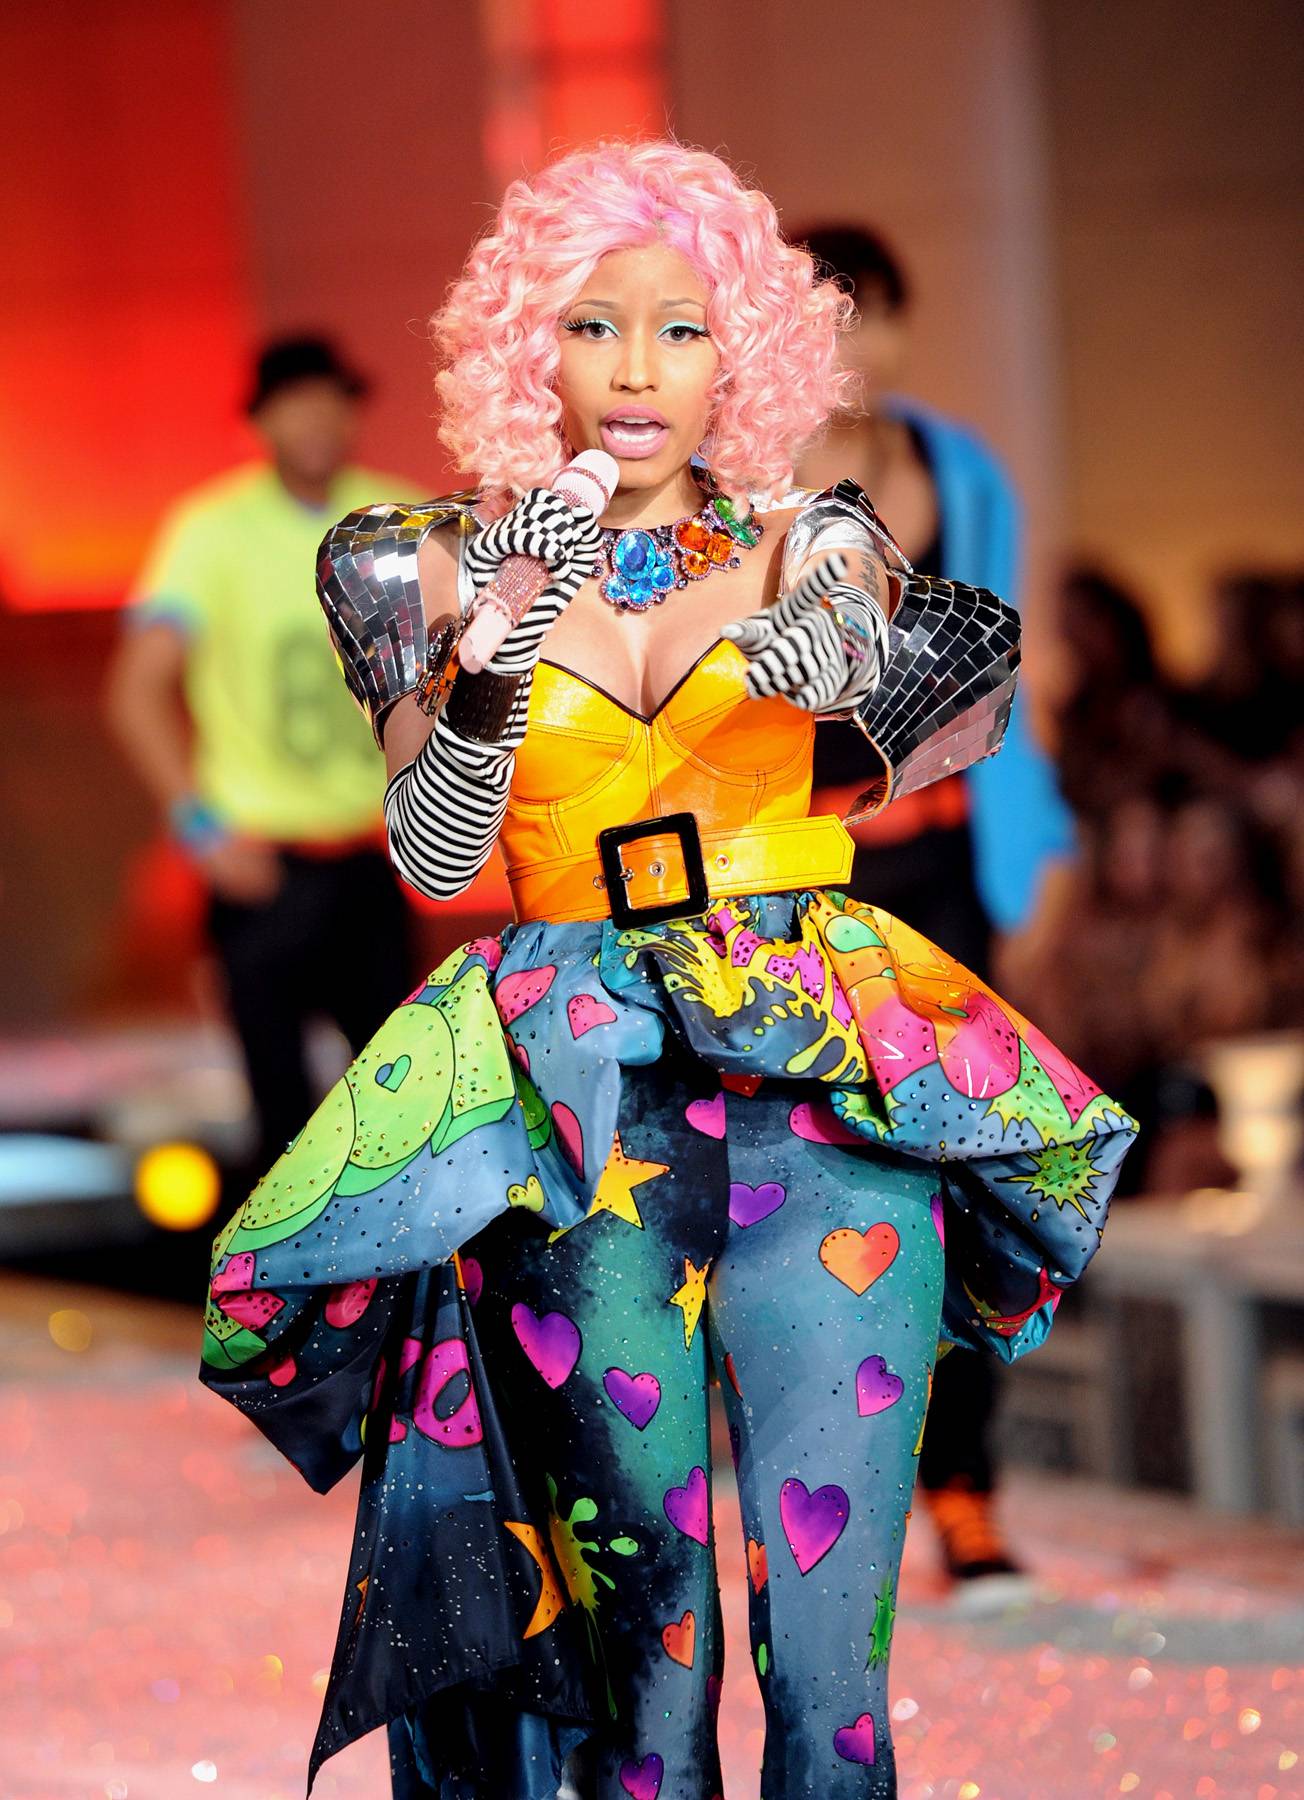 Most Likely to Win a Grammy — Nicki Minaj - The Queen of pink received not one, but three Grammy nominations for Best New Artist, Best Rap Album and Best Rap Performance with labelmate Drake for their hit single “Moment for Life.” Nicki was nominated last year for her guest spot on Ludacris’s “My Chick Bad,” but went home empty handed. However, 2011 has been her year to shine and we think she’ll definitely be starting off the year with at least one golden gramophone.&nbsp;(Photo: Jamie McCarthy/Getty Images)